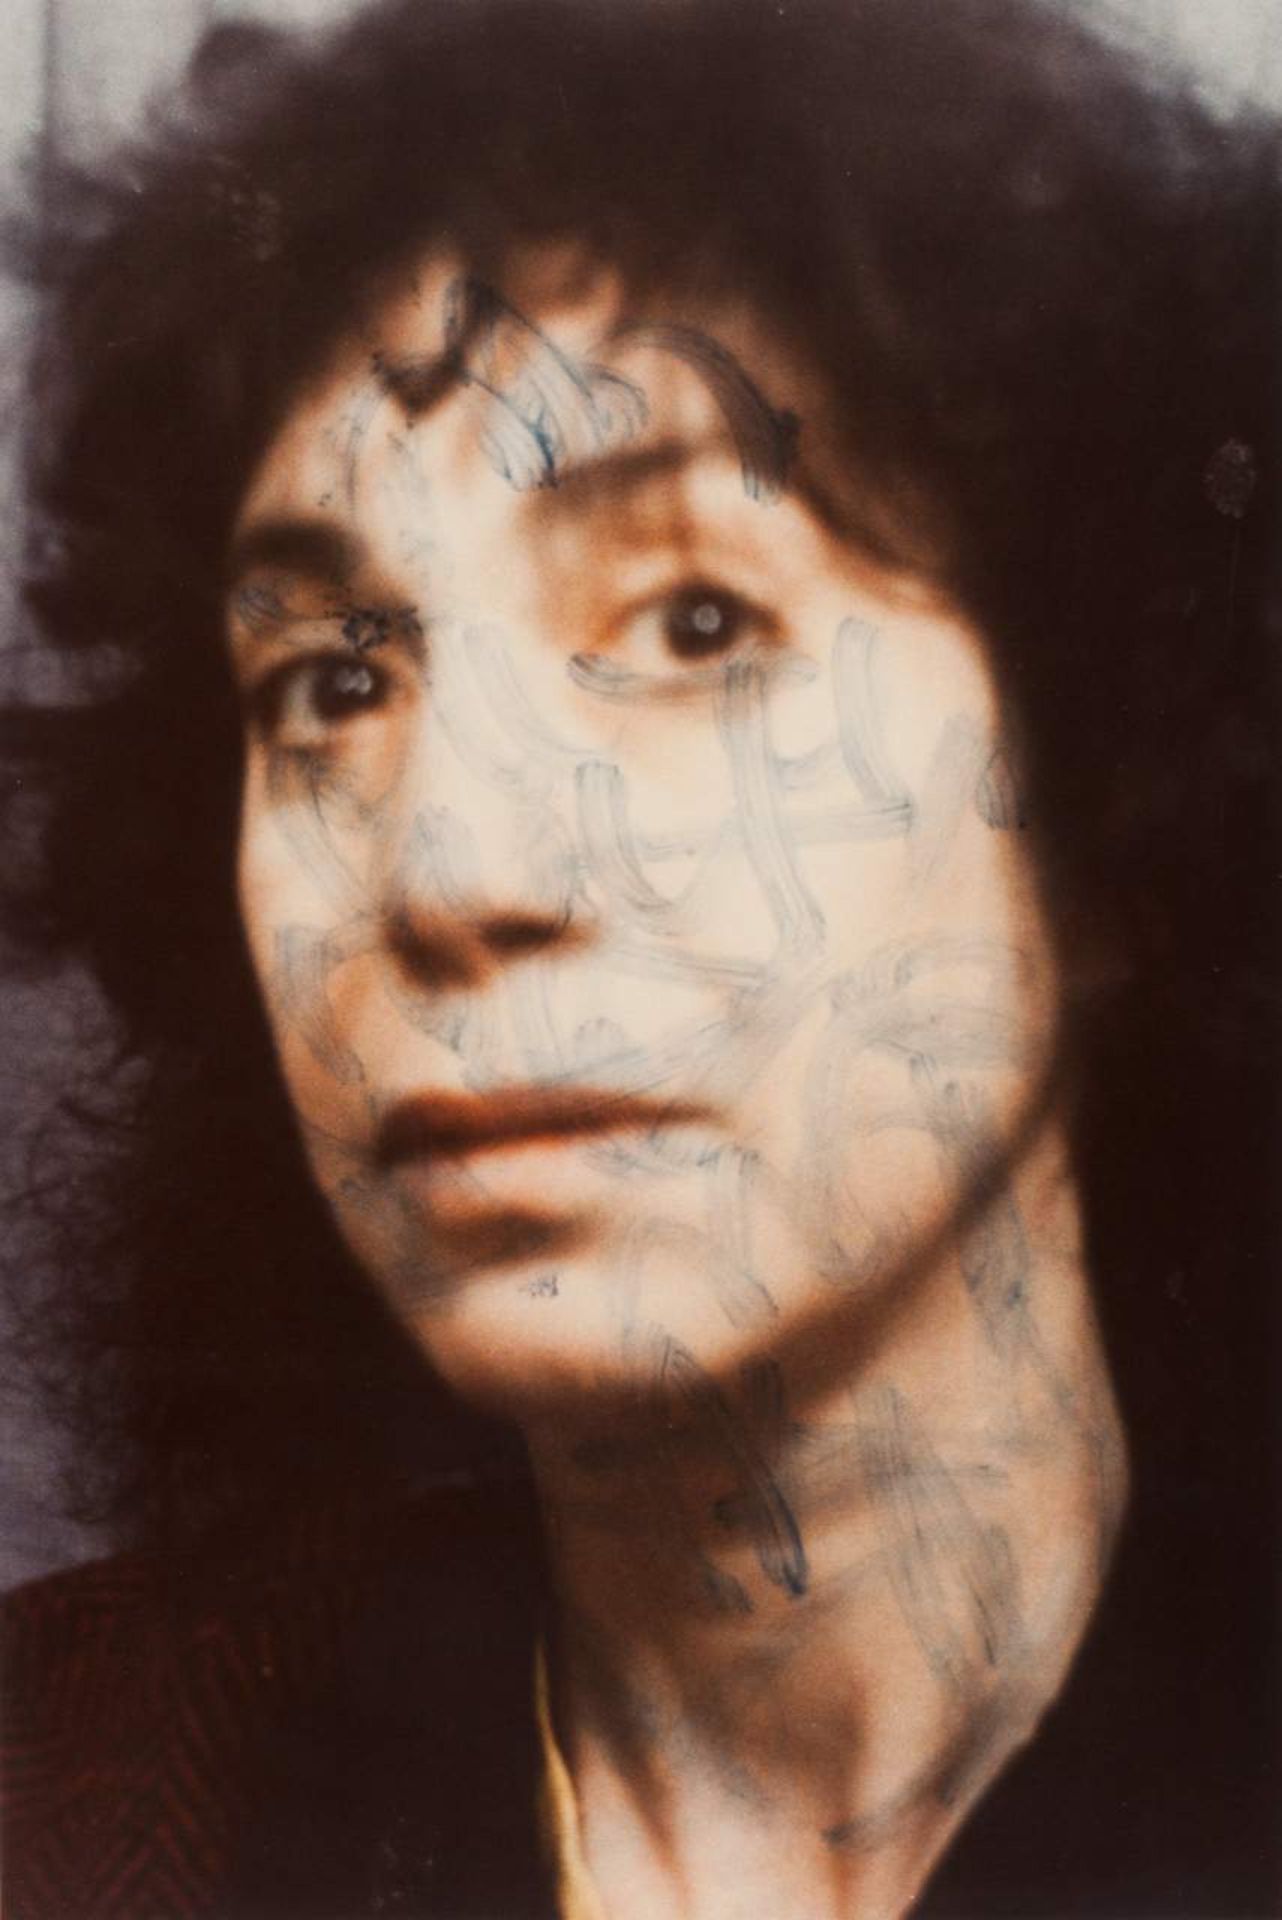 Susan Hiller (USA, b. 1940)
"Midnight (Waterloo)", 1983
C-type photograph enlarged from automatic